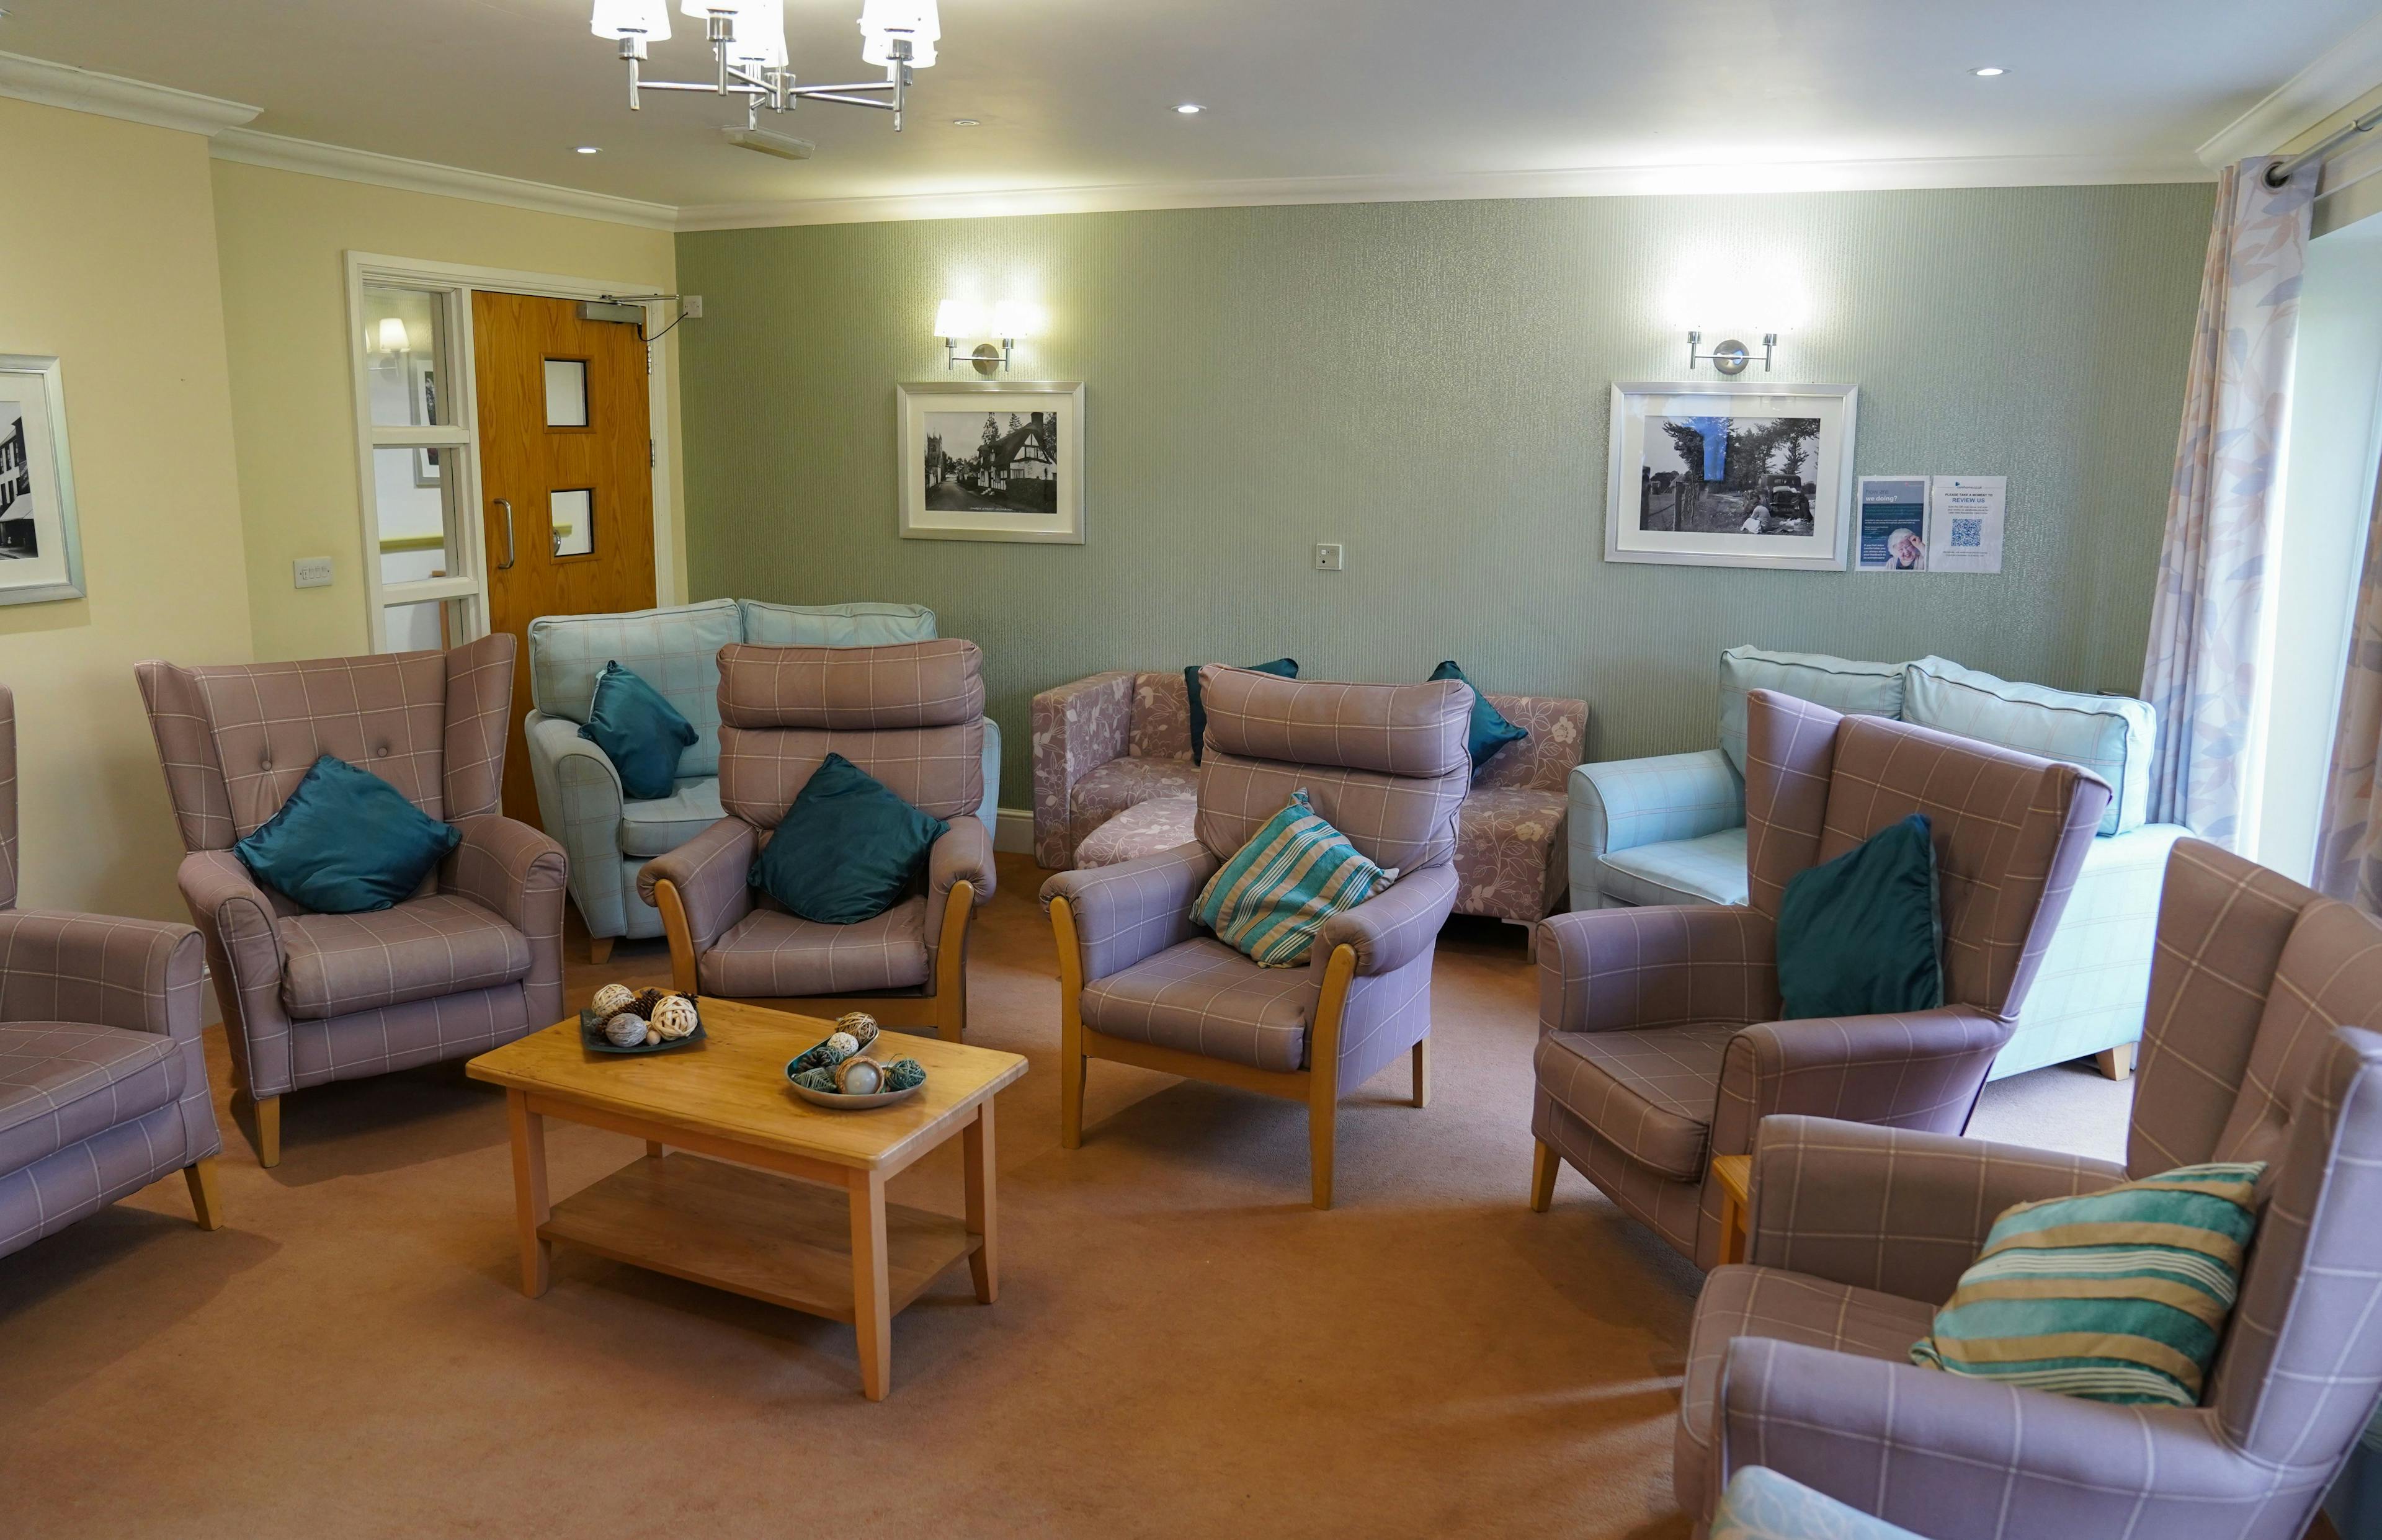 Lounge of Lake View in Telford, Shopshire